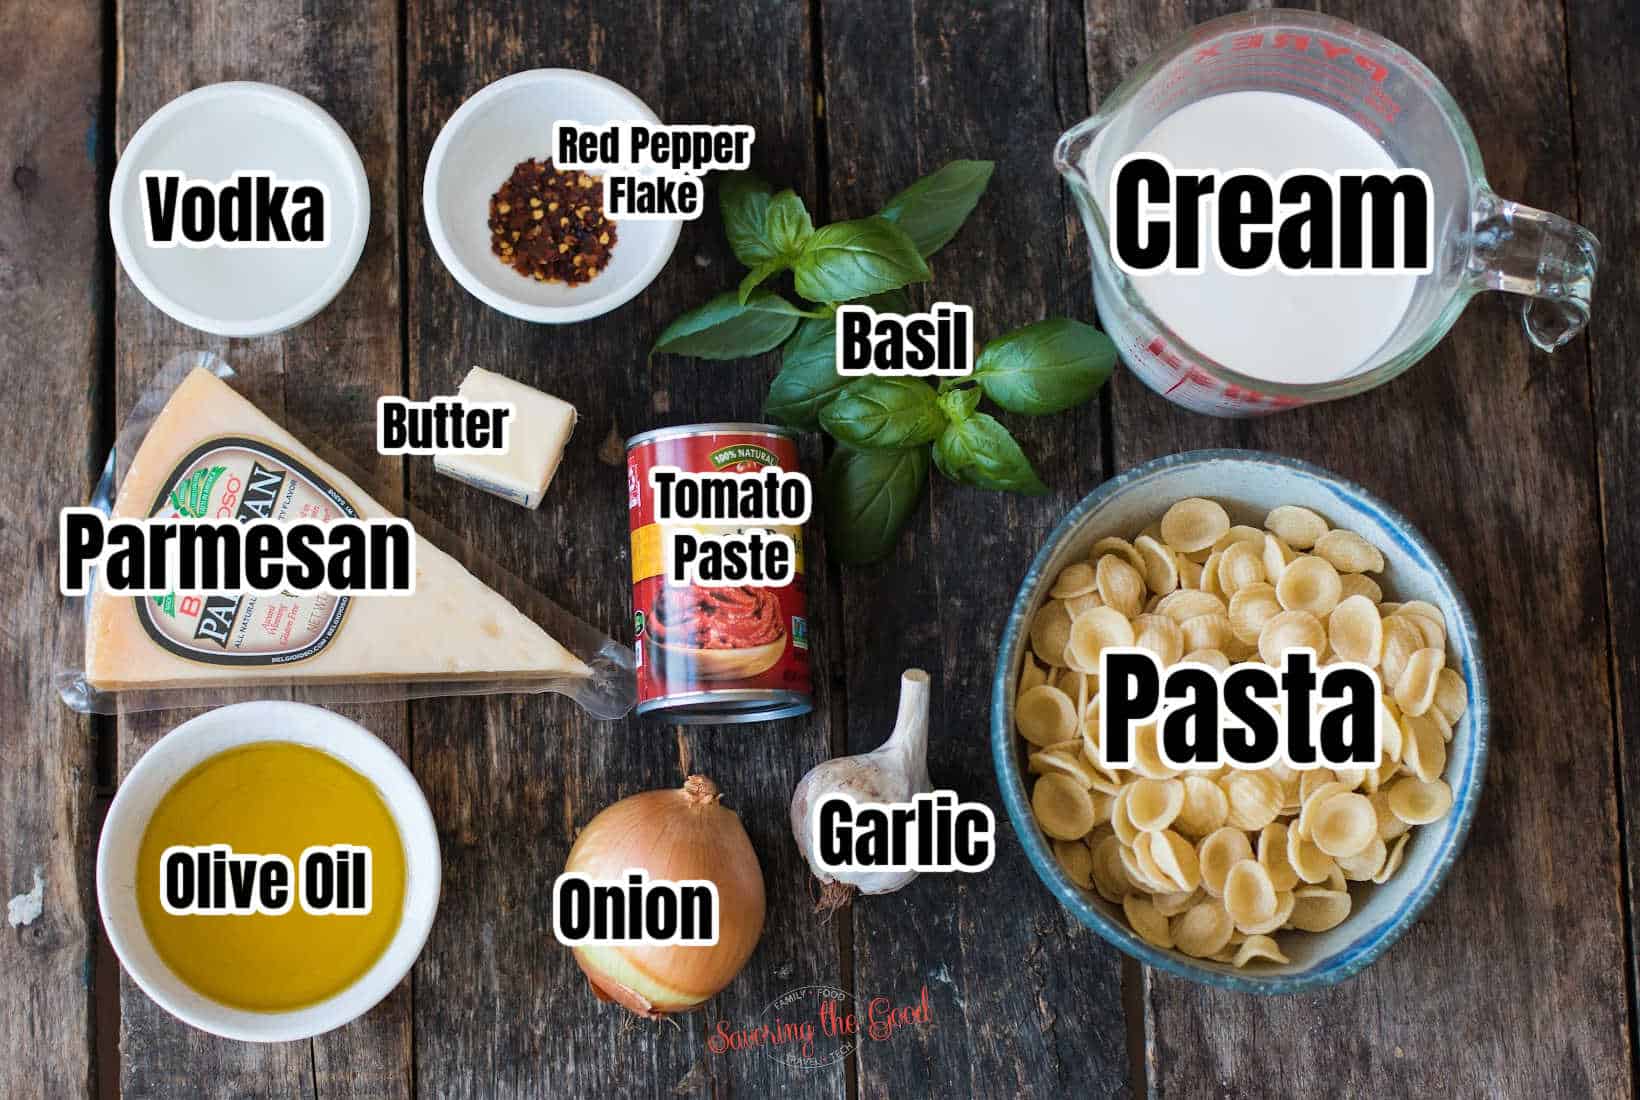 ingredients for gigi hadid pasta with text overlay labeling them. Vodka, red pepper flake, basil, cream, pasta, garlic, onion, tomato paste, butter, parmesan, olive oil.